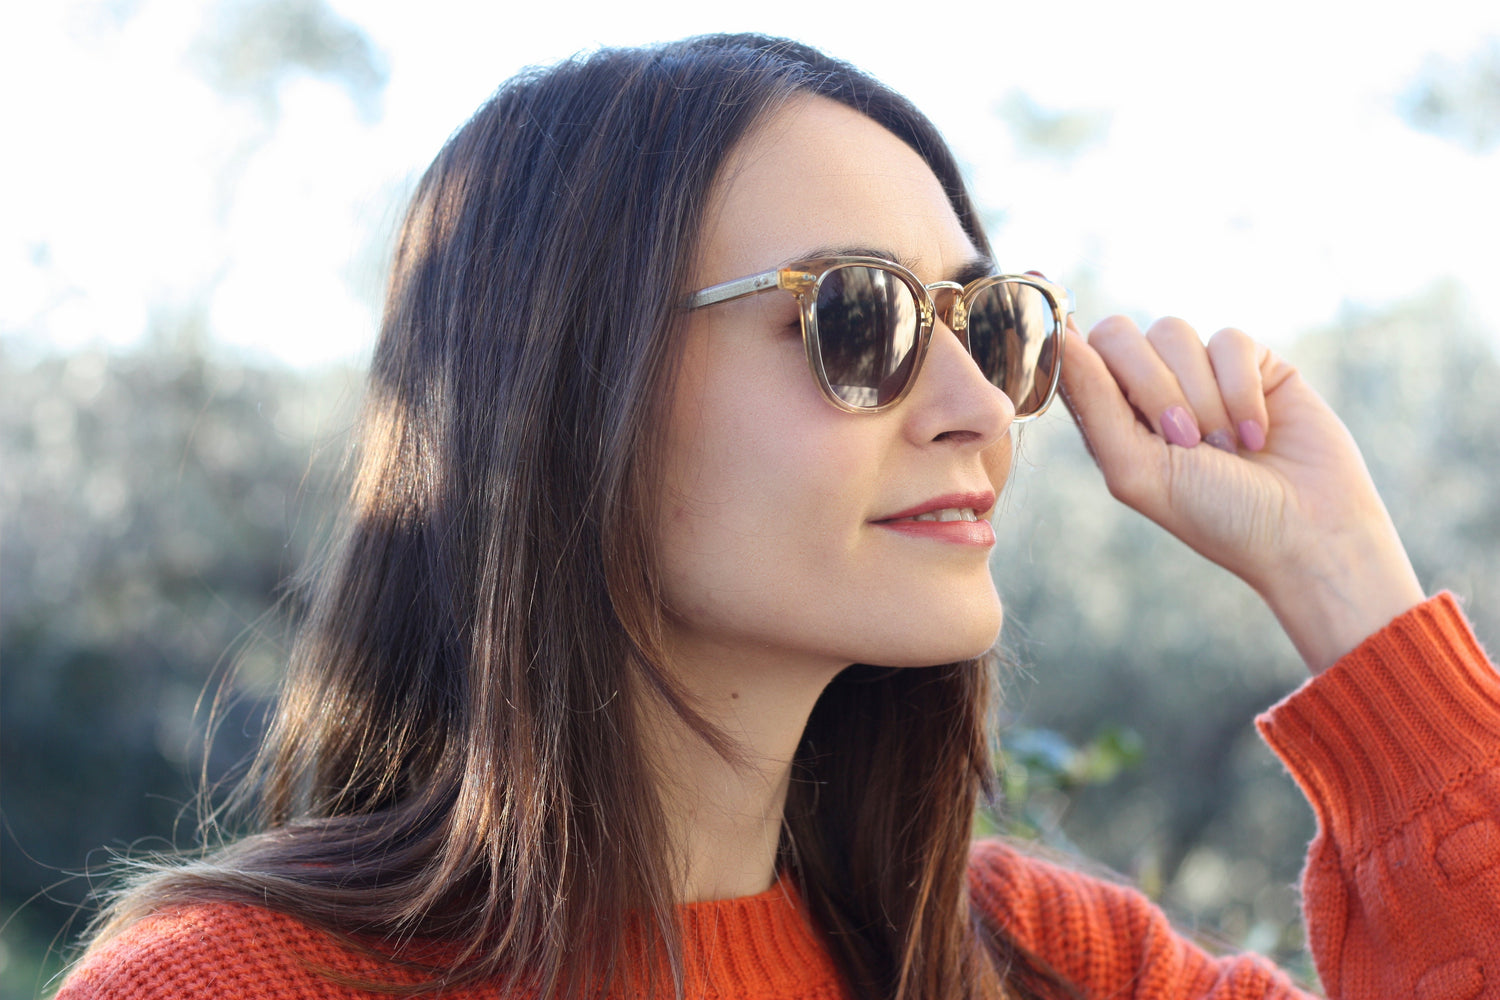 What Are The Best Sunglasses For Blocking Sun? | KOALAEYE OPTICAL